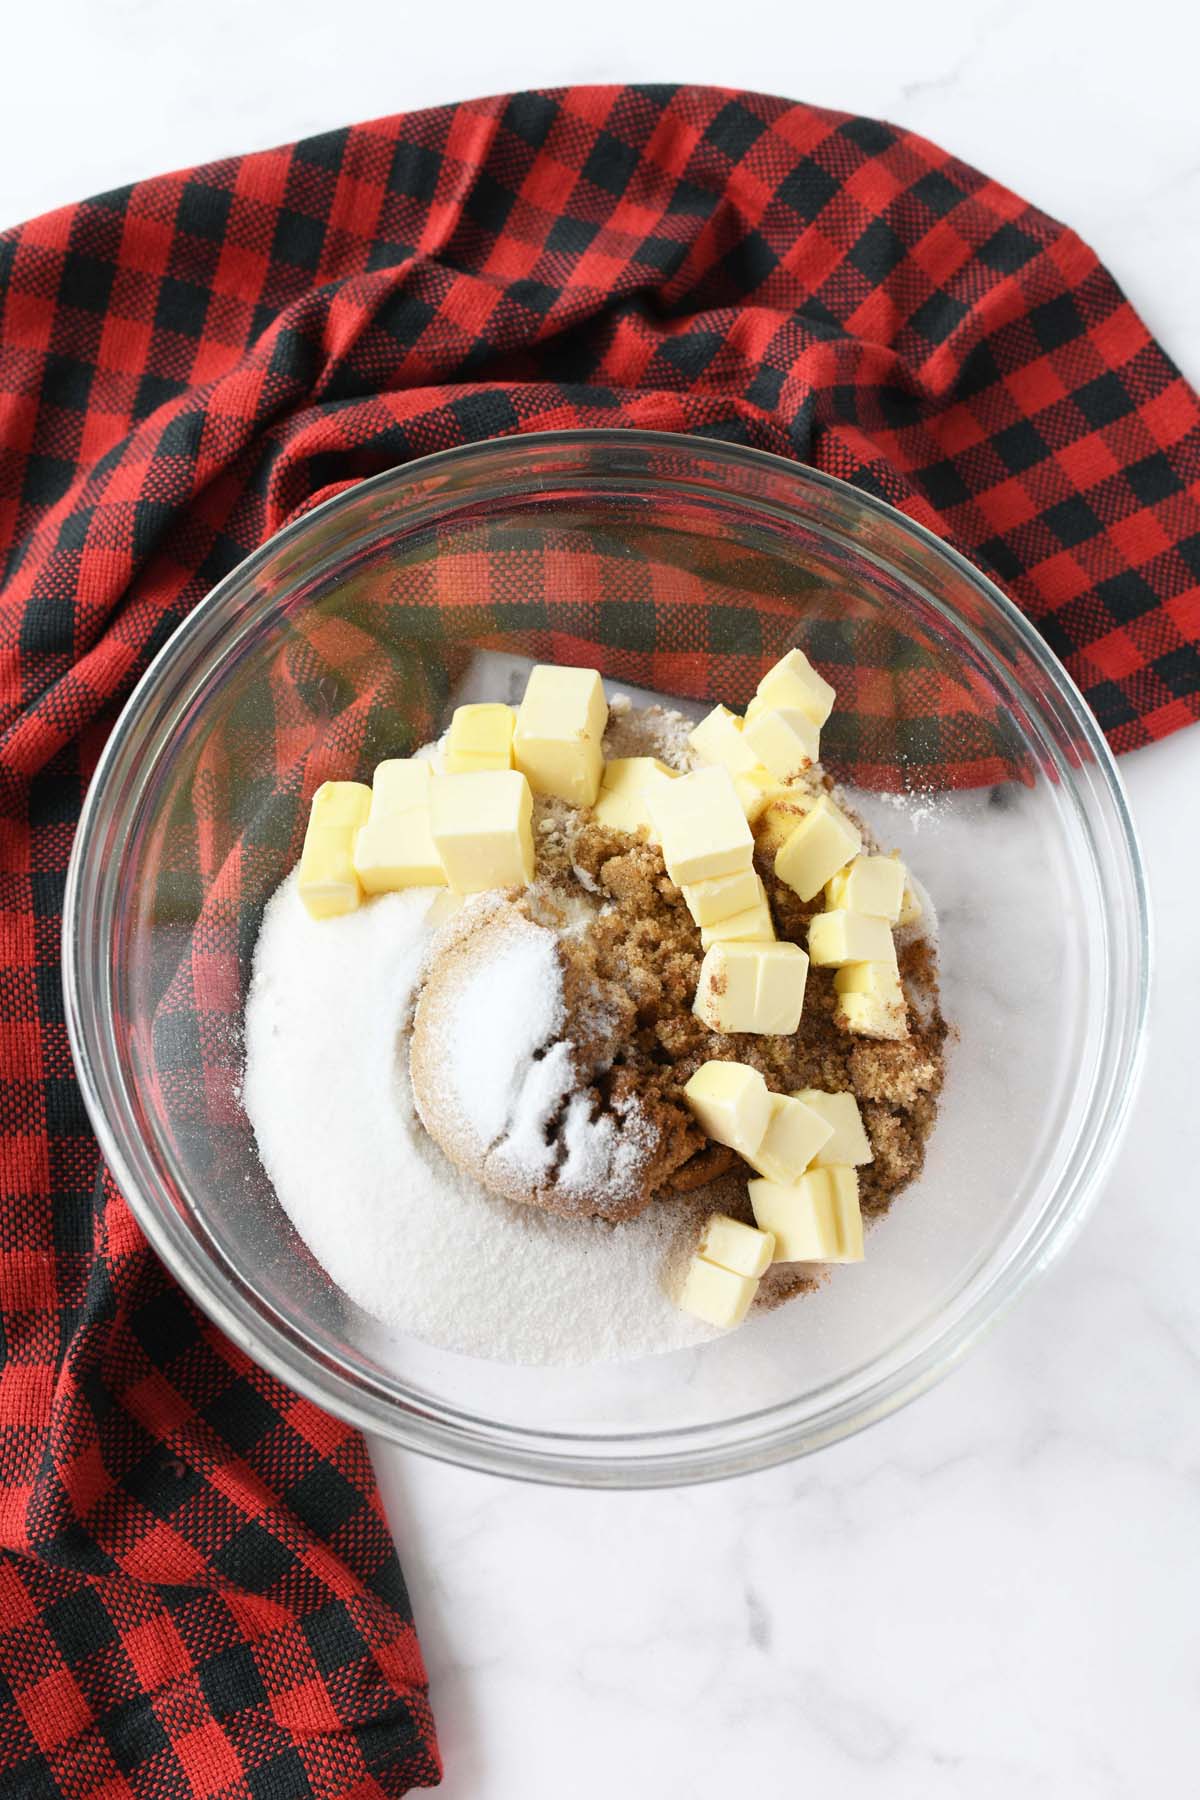 Butter cubes and sugar in a glass bowl with a plaid napkin.